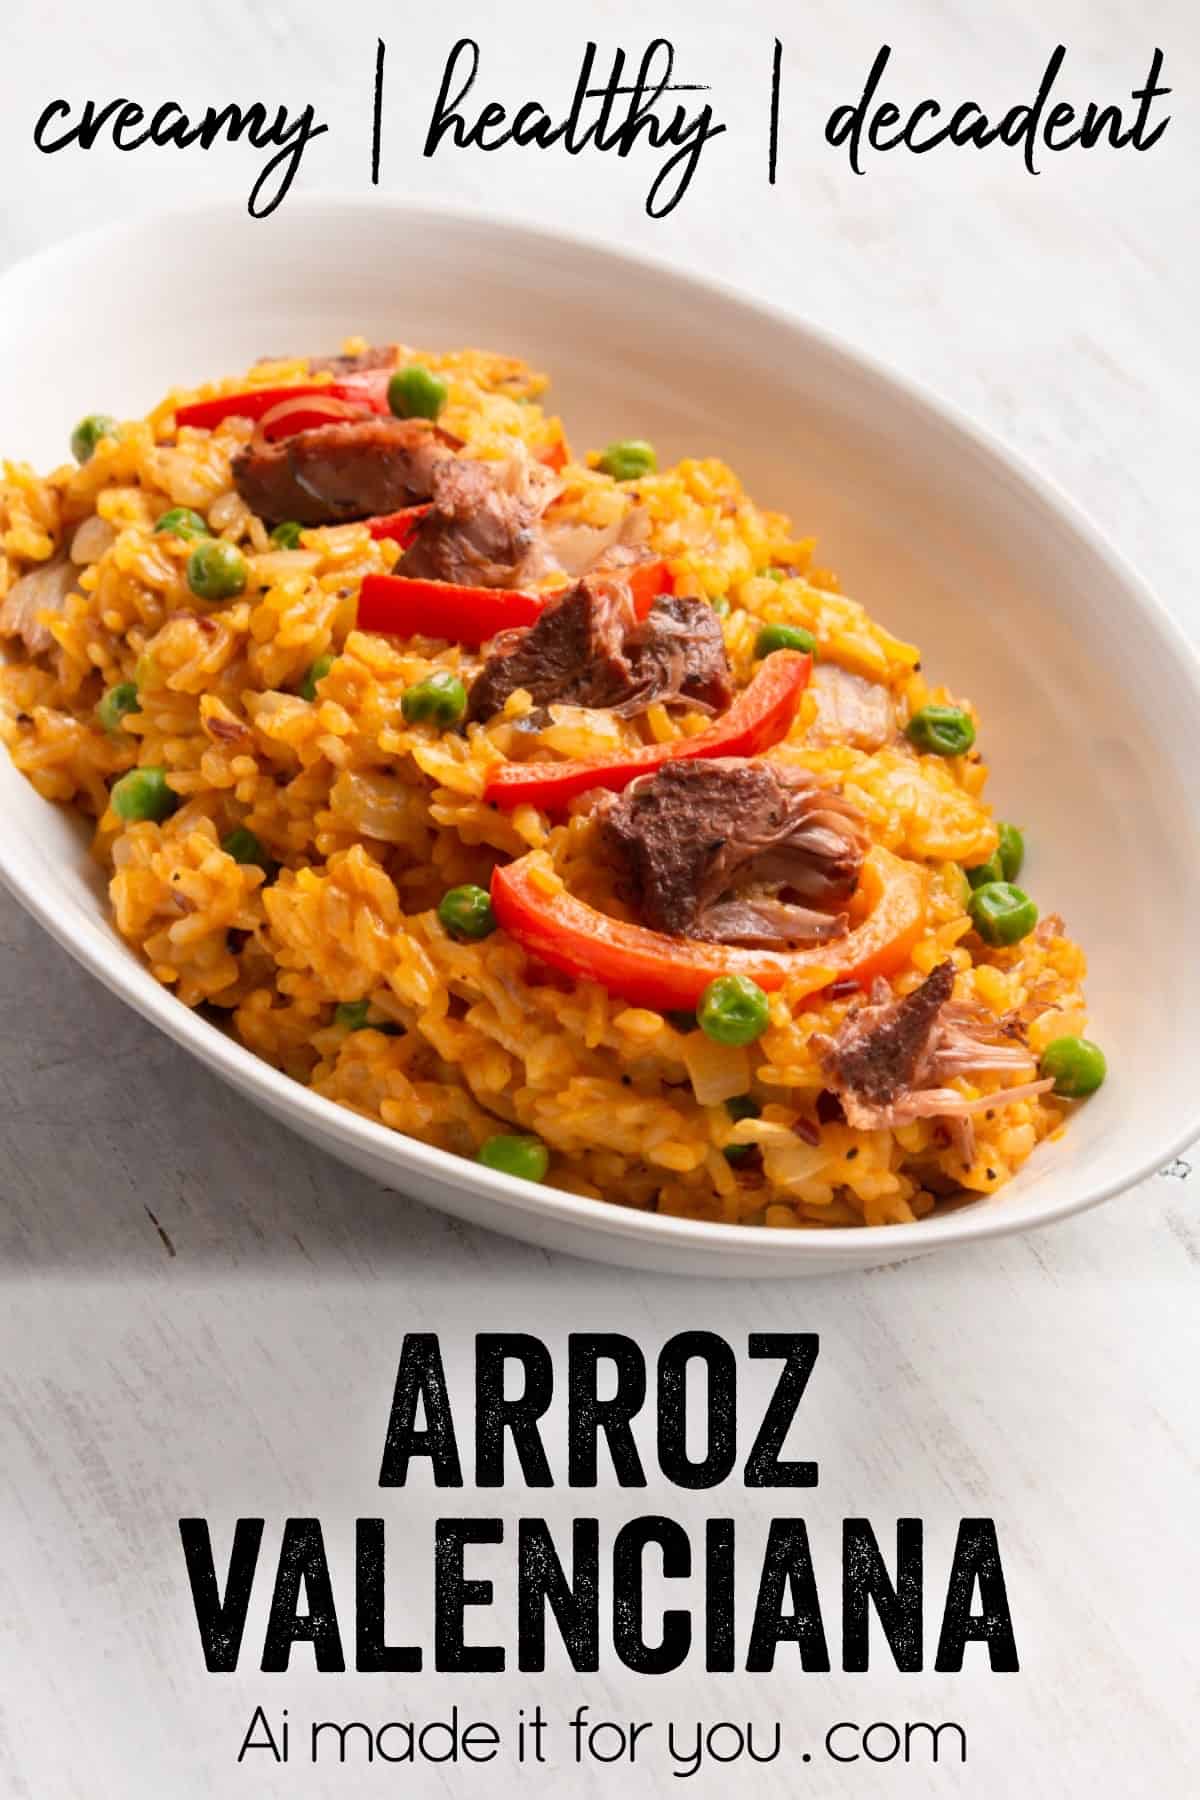 Vegan arroz valenciana is a plant based twist on the classic hearty Filipino dish using rice, coconut milk, jackfruit confit, and saffron! Full of flavor and vegetables, it tastes healthy yet creamy and decadent! #vegandinner #filipinofood #plantbasedmeal #meatlessmonday #coconutmilk